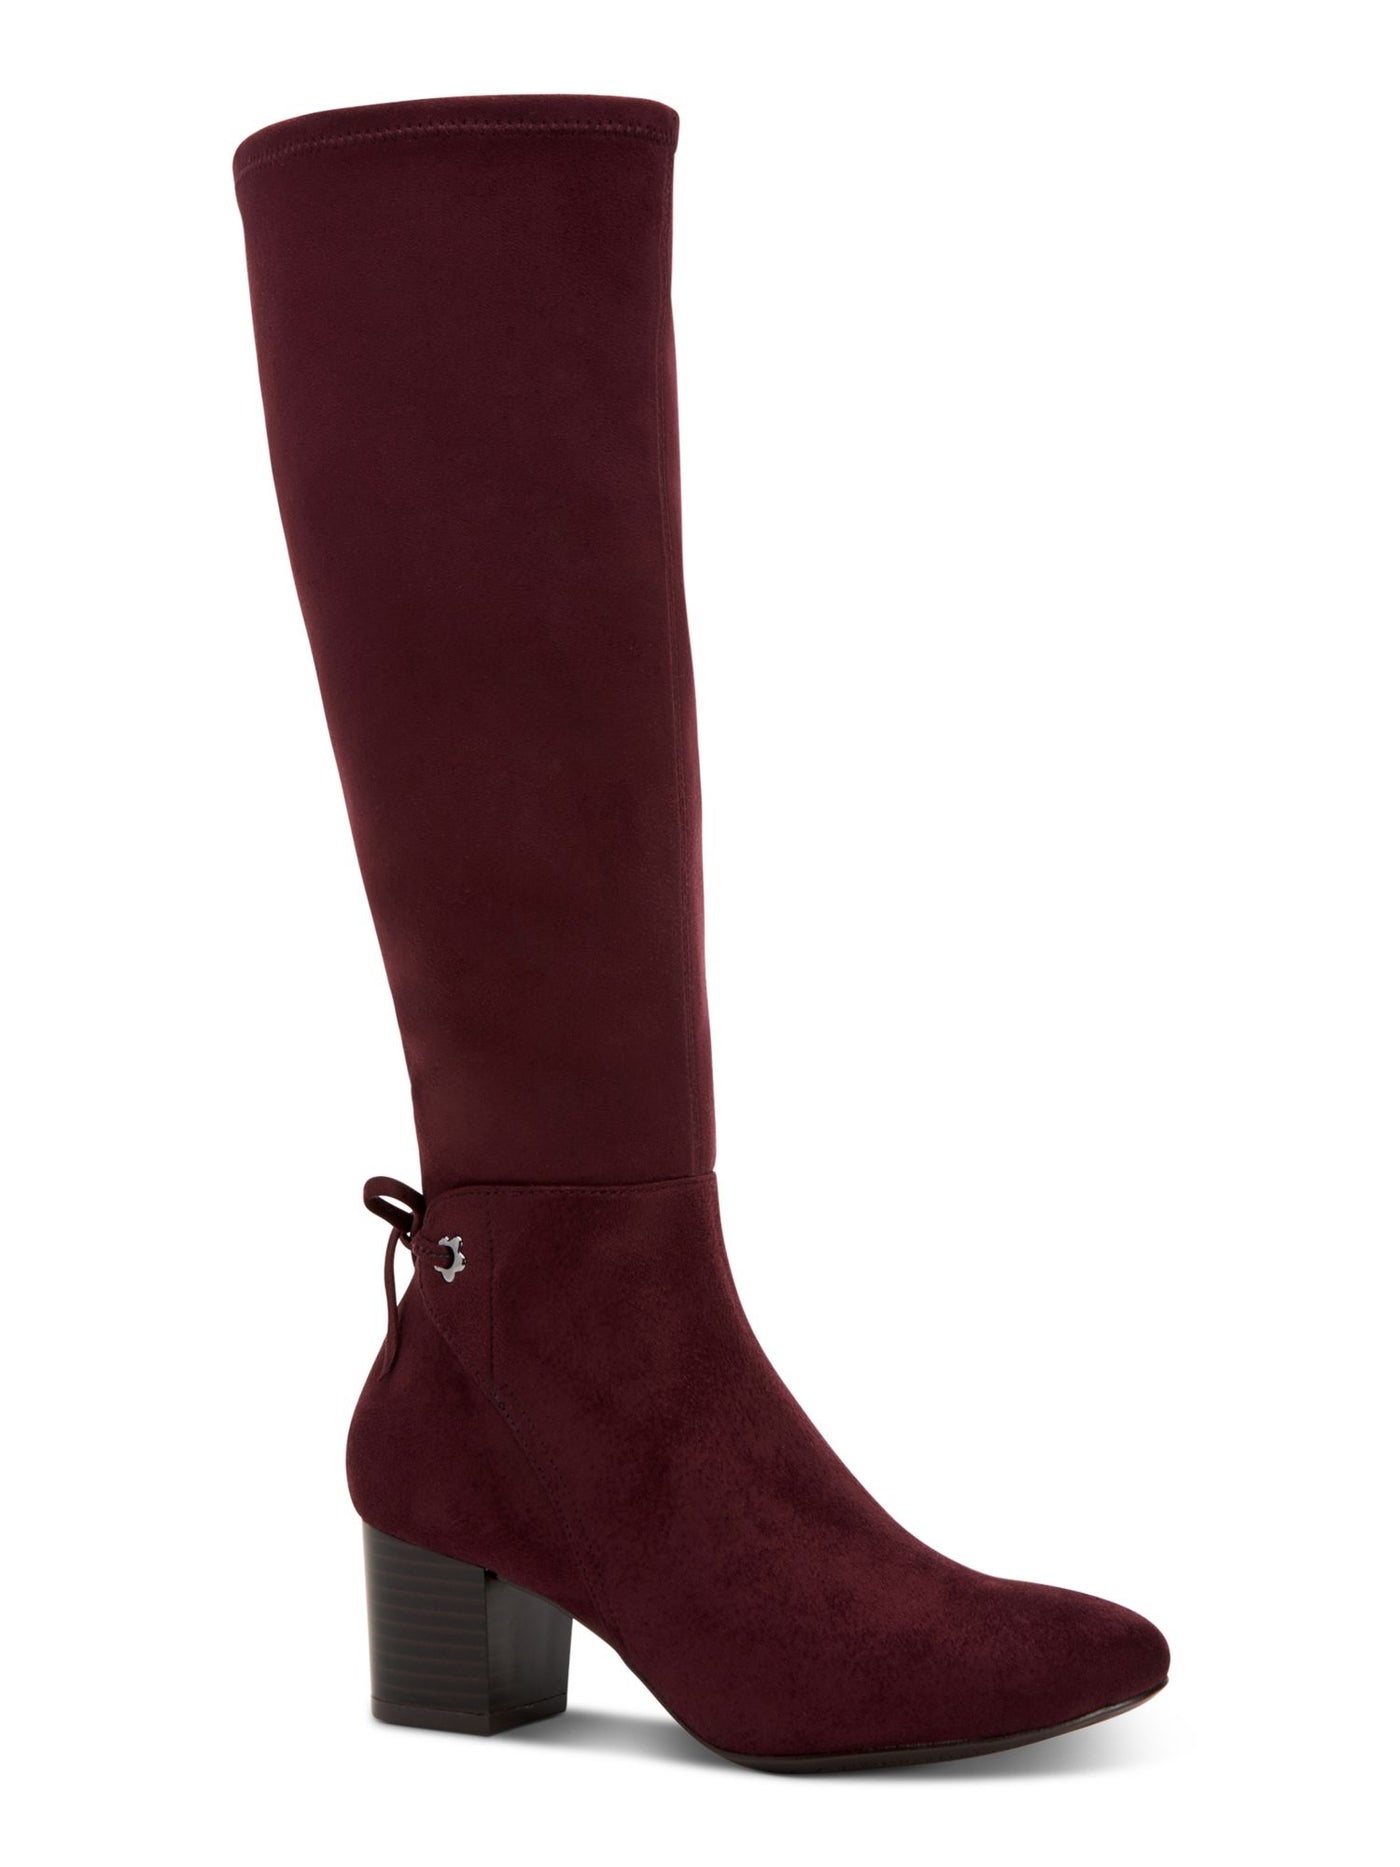 CHARTER CLUB Womens Burgundy Flower Grommets Bow Accent Padded Jaccque Almond Toe Block Heel Zip-Up Boots Shoes 10 M